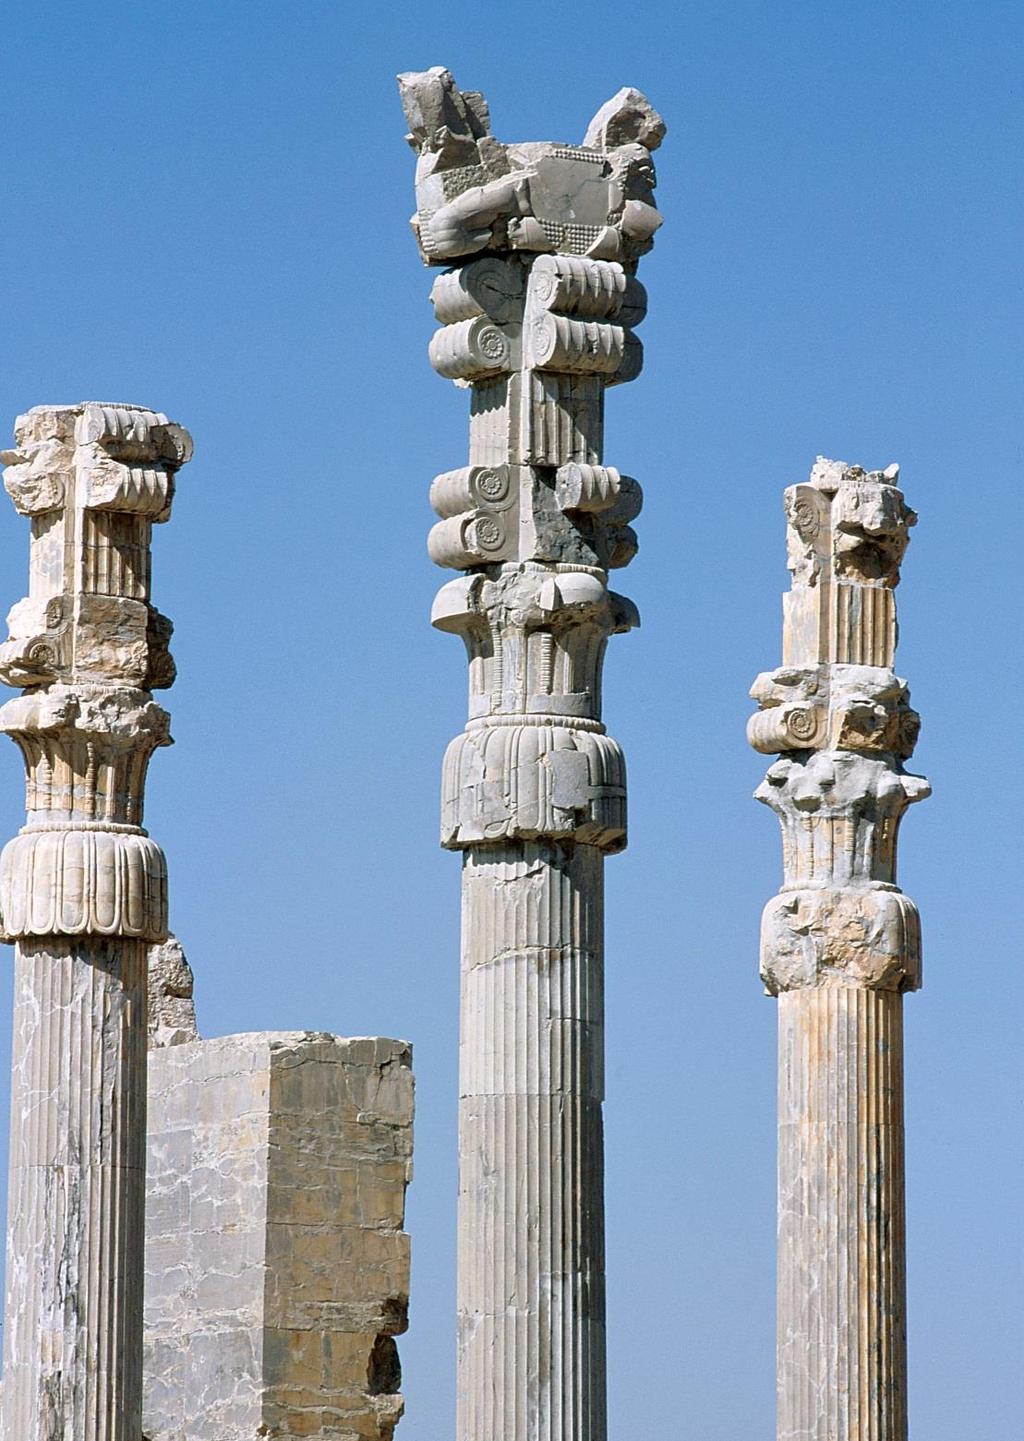 Three columns with animal protomes, from the apadana of the palace Persepolis, Iran The columns of the apadana are 64 tall and supported cedar beams [the cedar was imported from Lebanon] The capitals